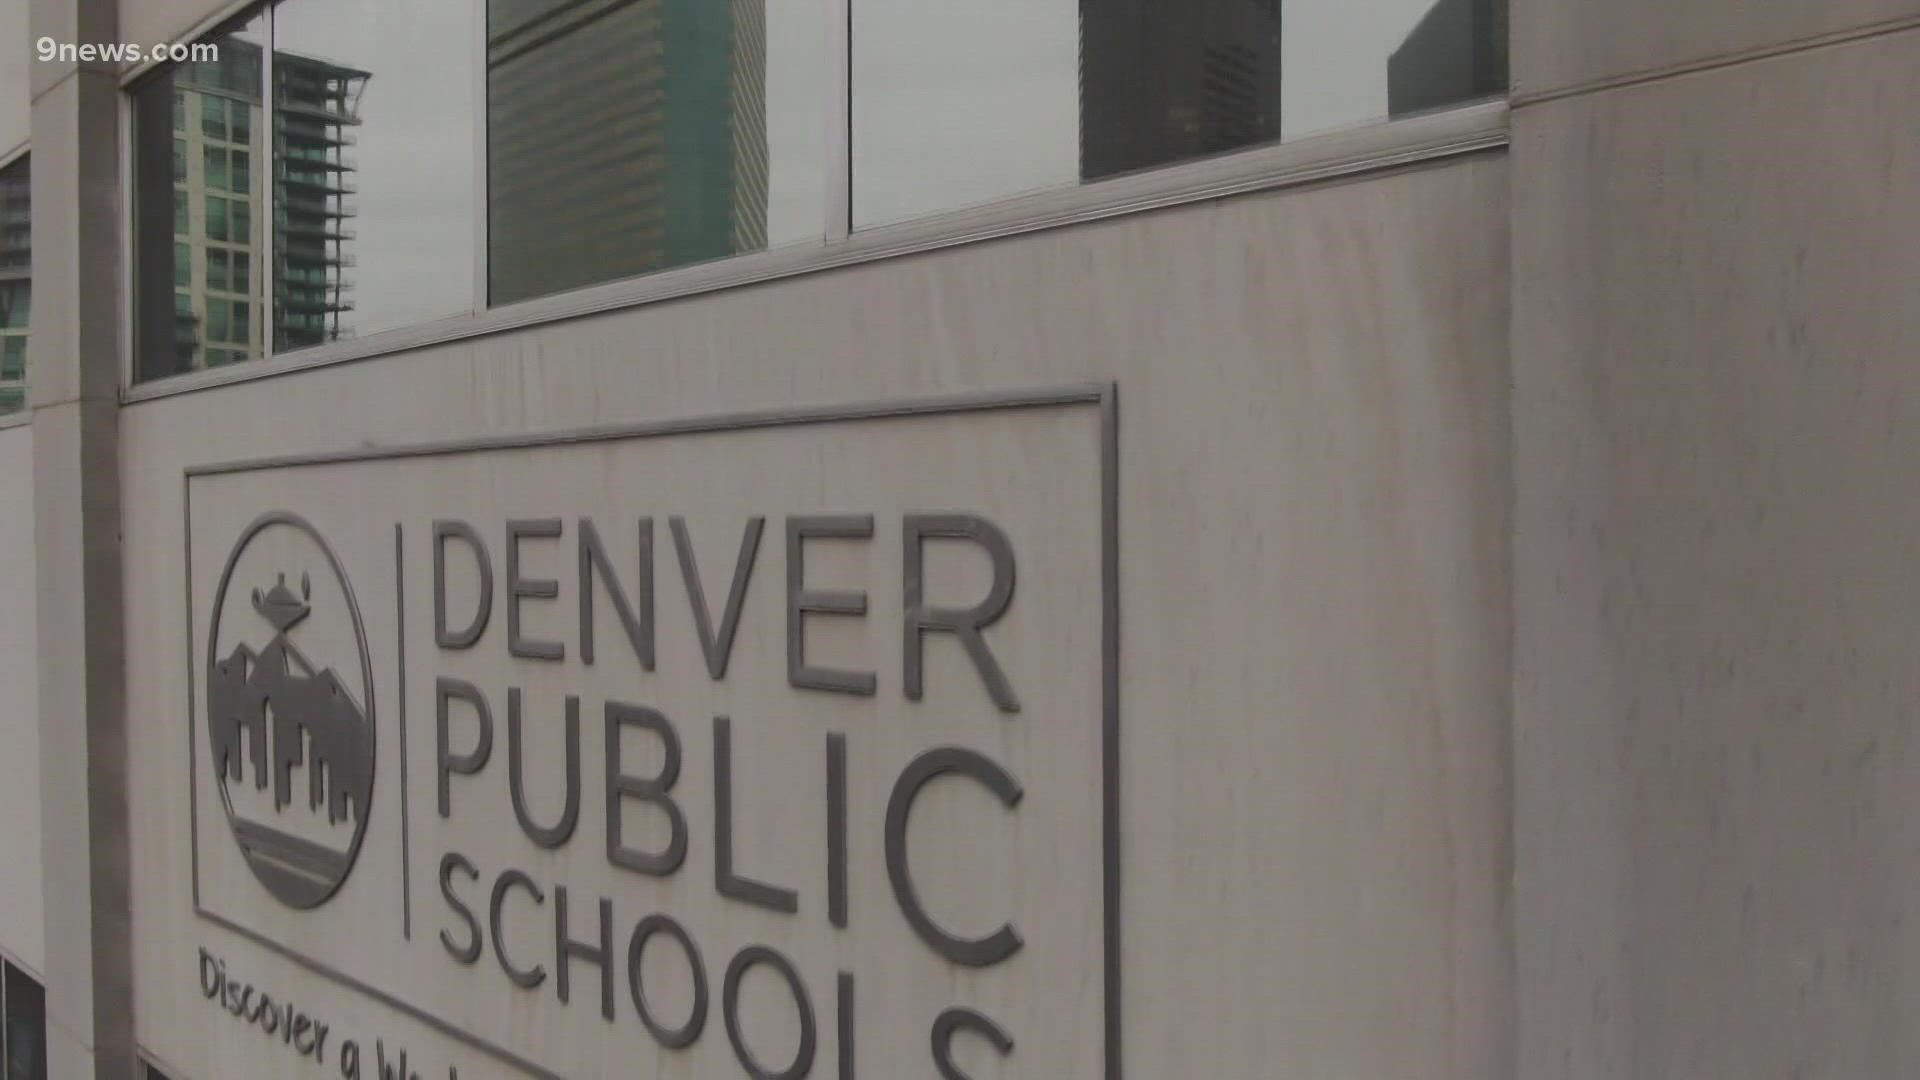 Denver School Board member Tay Anderson tweeted Thursday that he received confirmation that the board will move forward with censuring him.